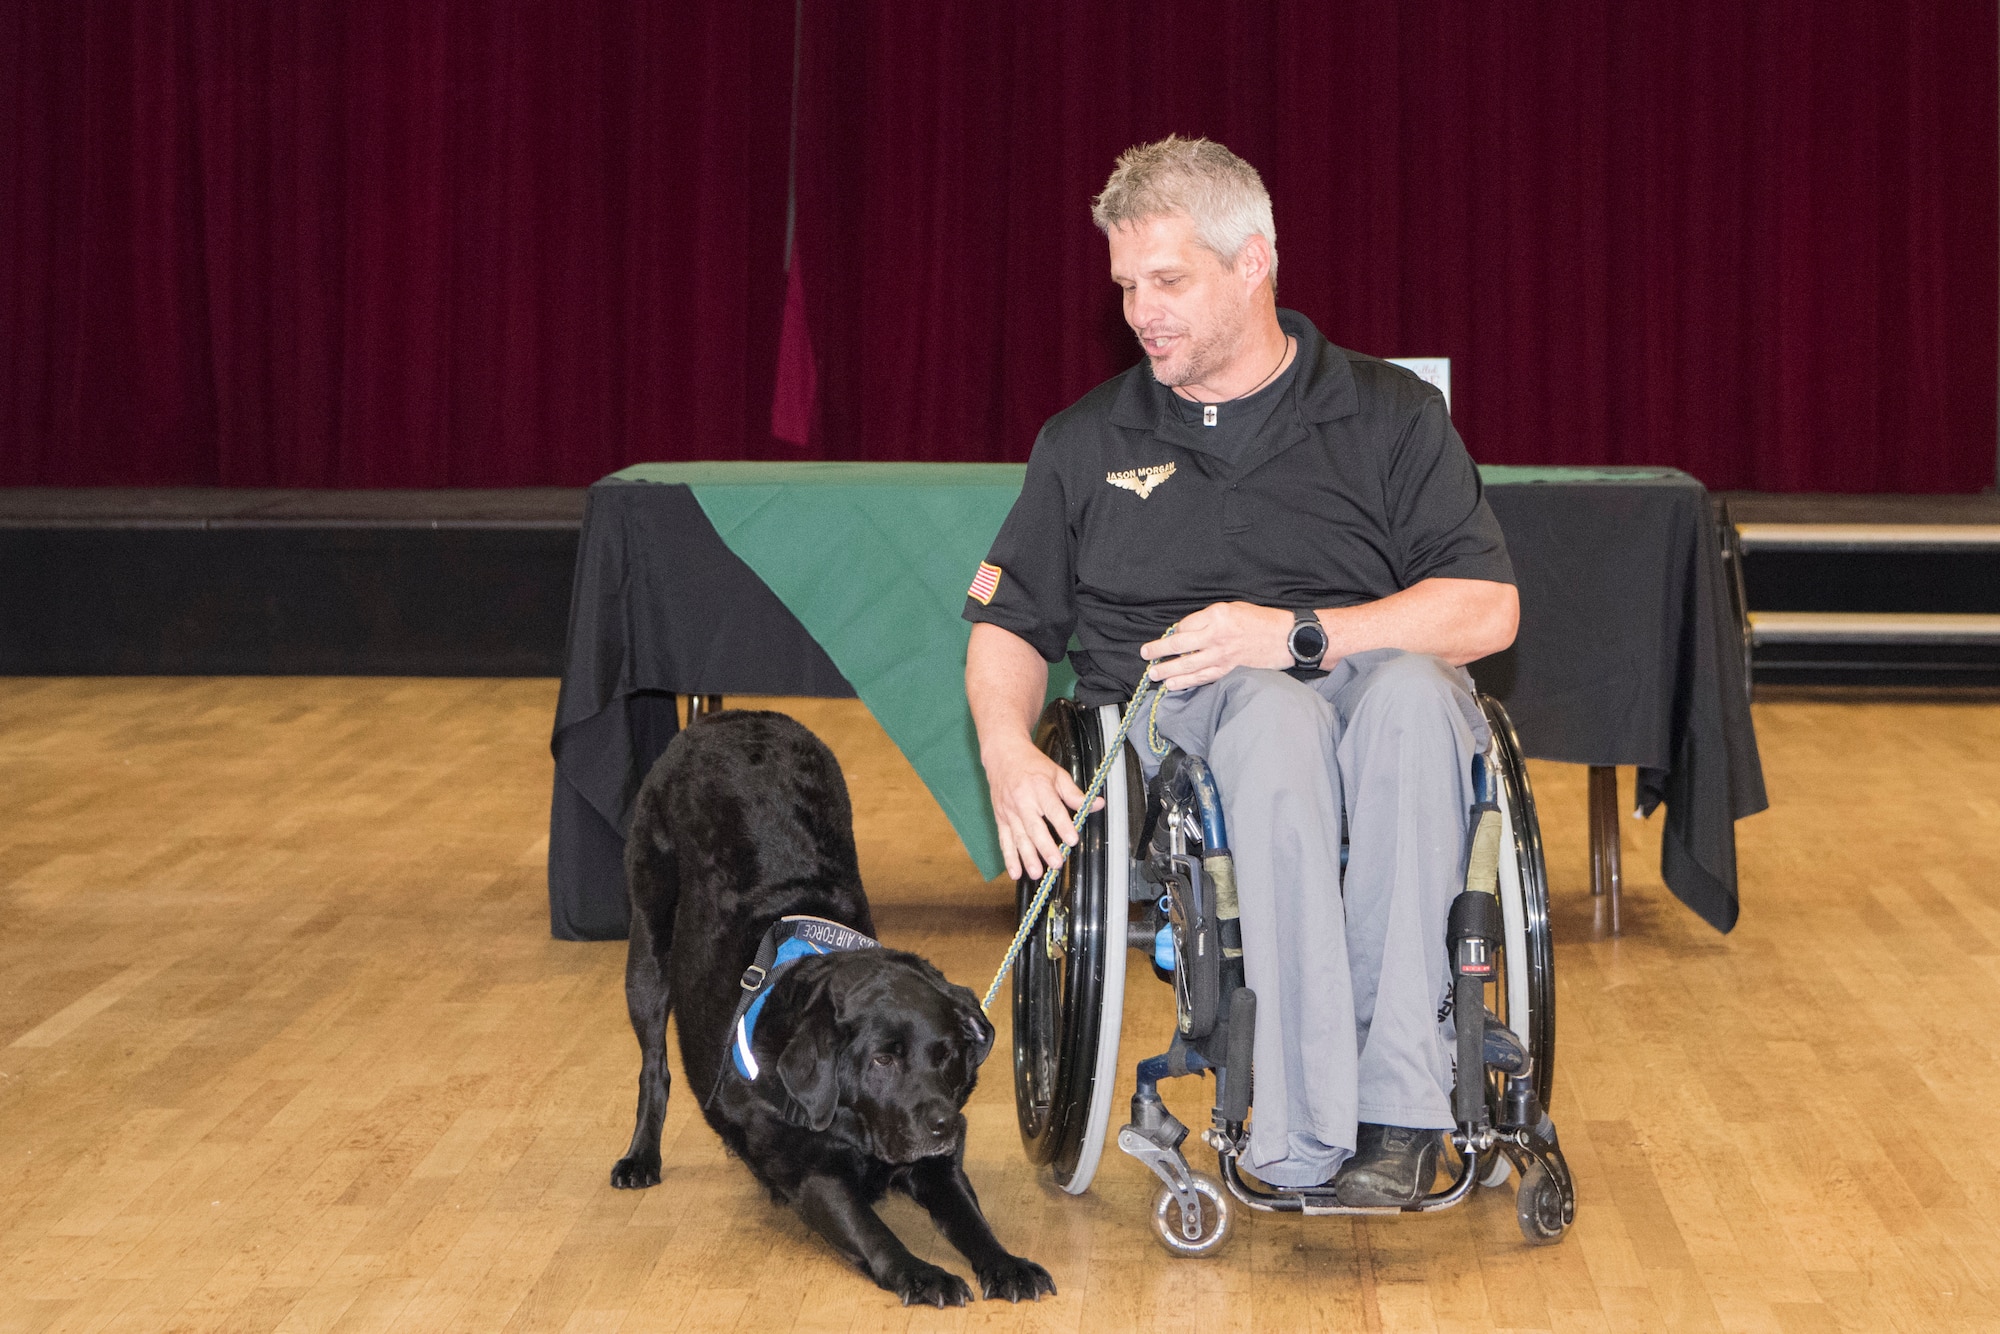 Retired Staff Sgt. Jason Morgan gives his service dog the command to lie down while sharing his story with audience members for a resiliency event on Ramstein Air Base, Germany, April 3, 2019. Morgan became paralyzed from the waist down after the vehicle he rode in careened off a cliff. Despite numerous setbacks, including a leg amputation, he competed and medaled in the U.S. Warrior Games and finished the Marine Corp Marathon in Washington, D.C. (U.S. Air Force photo by Airman 1st Class Kristof J. Rixmann)